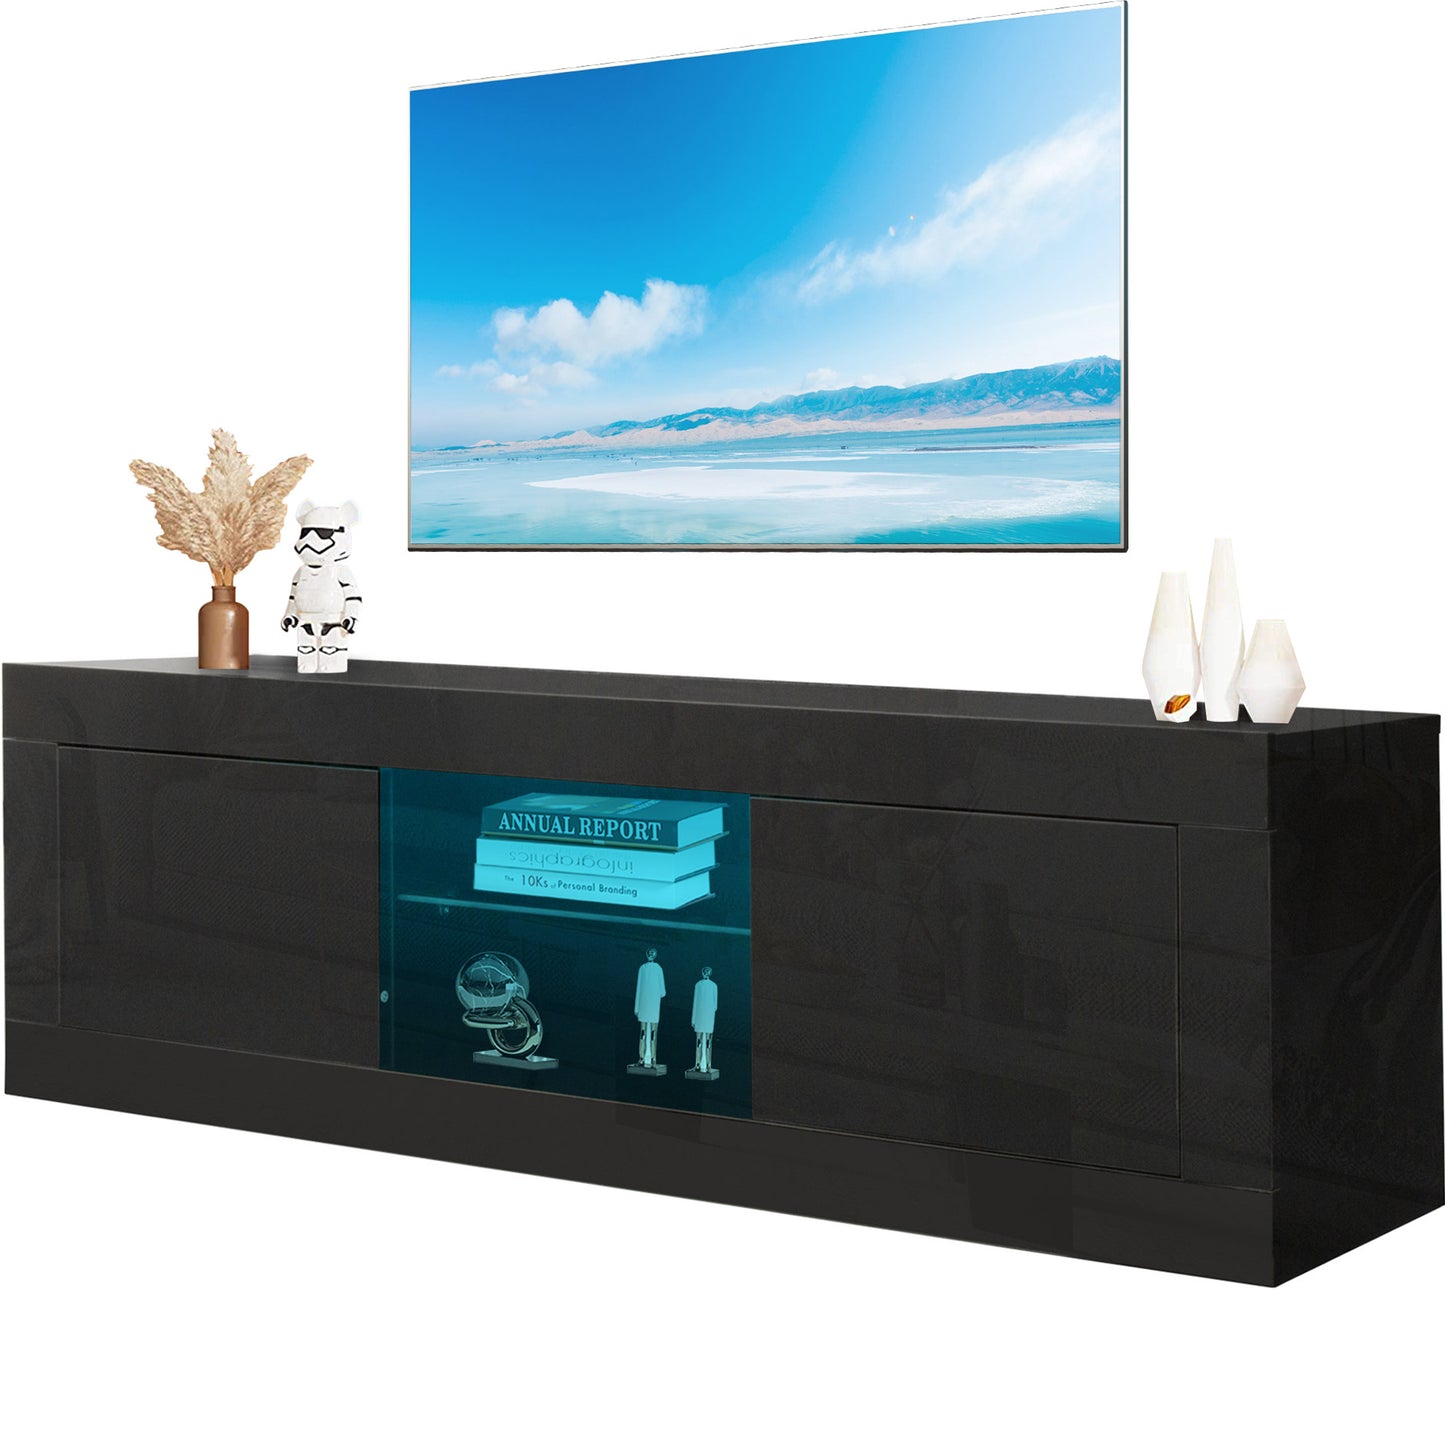 SYNGAR Black TV Stand for 55 inch TV, Modern High Glossy TV Console Table Stand with 16 Colors LED Lights, Living Room TV Table Stand Buffet Cabinet with Storage, 47"L×16" W×16" H